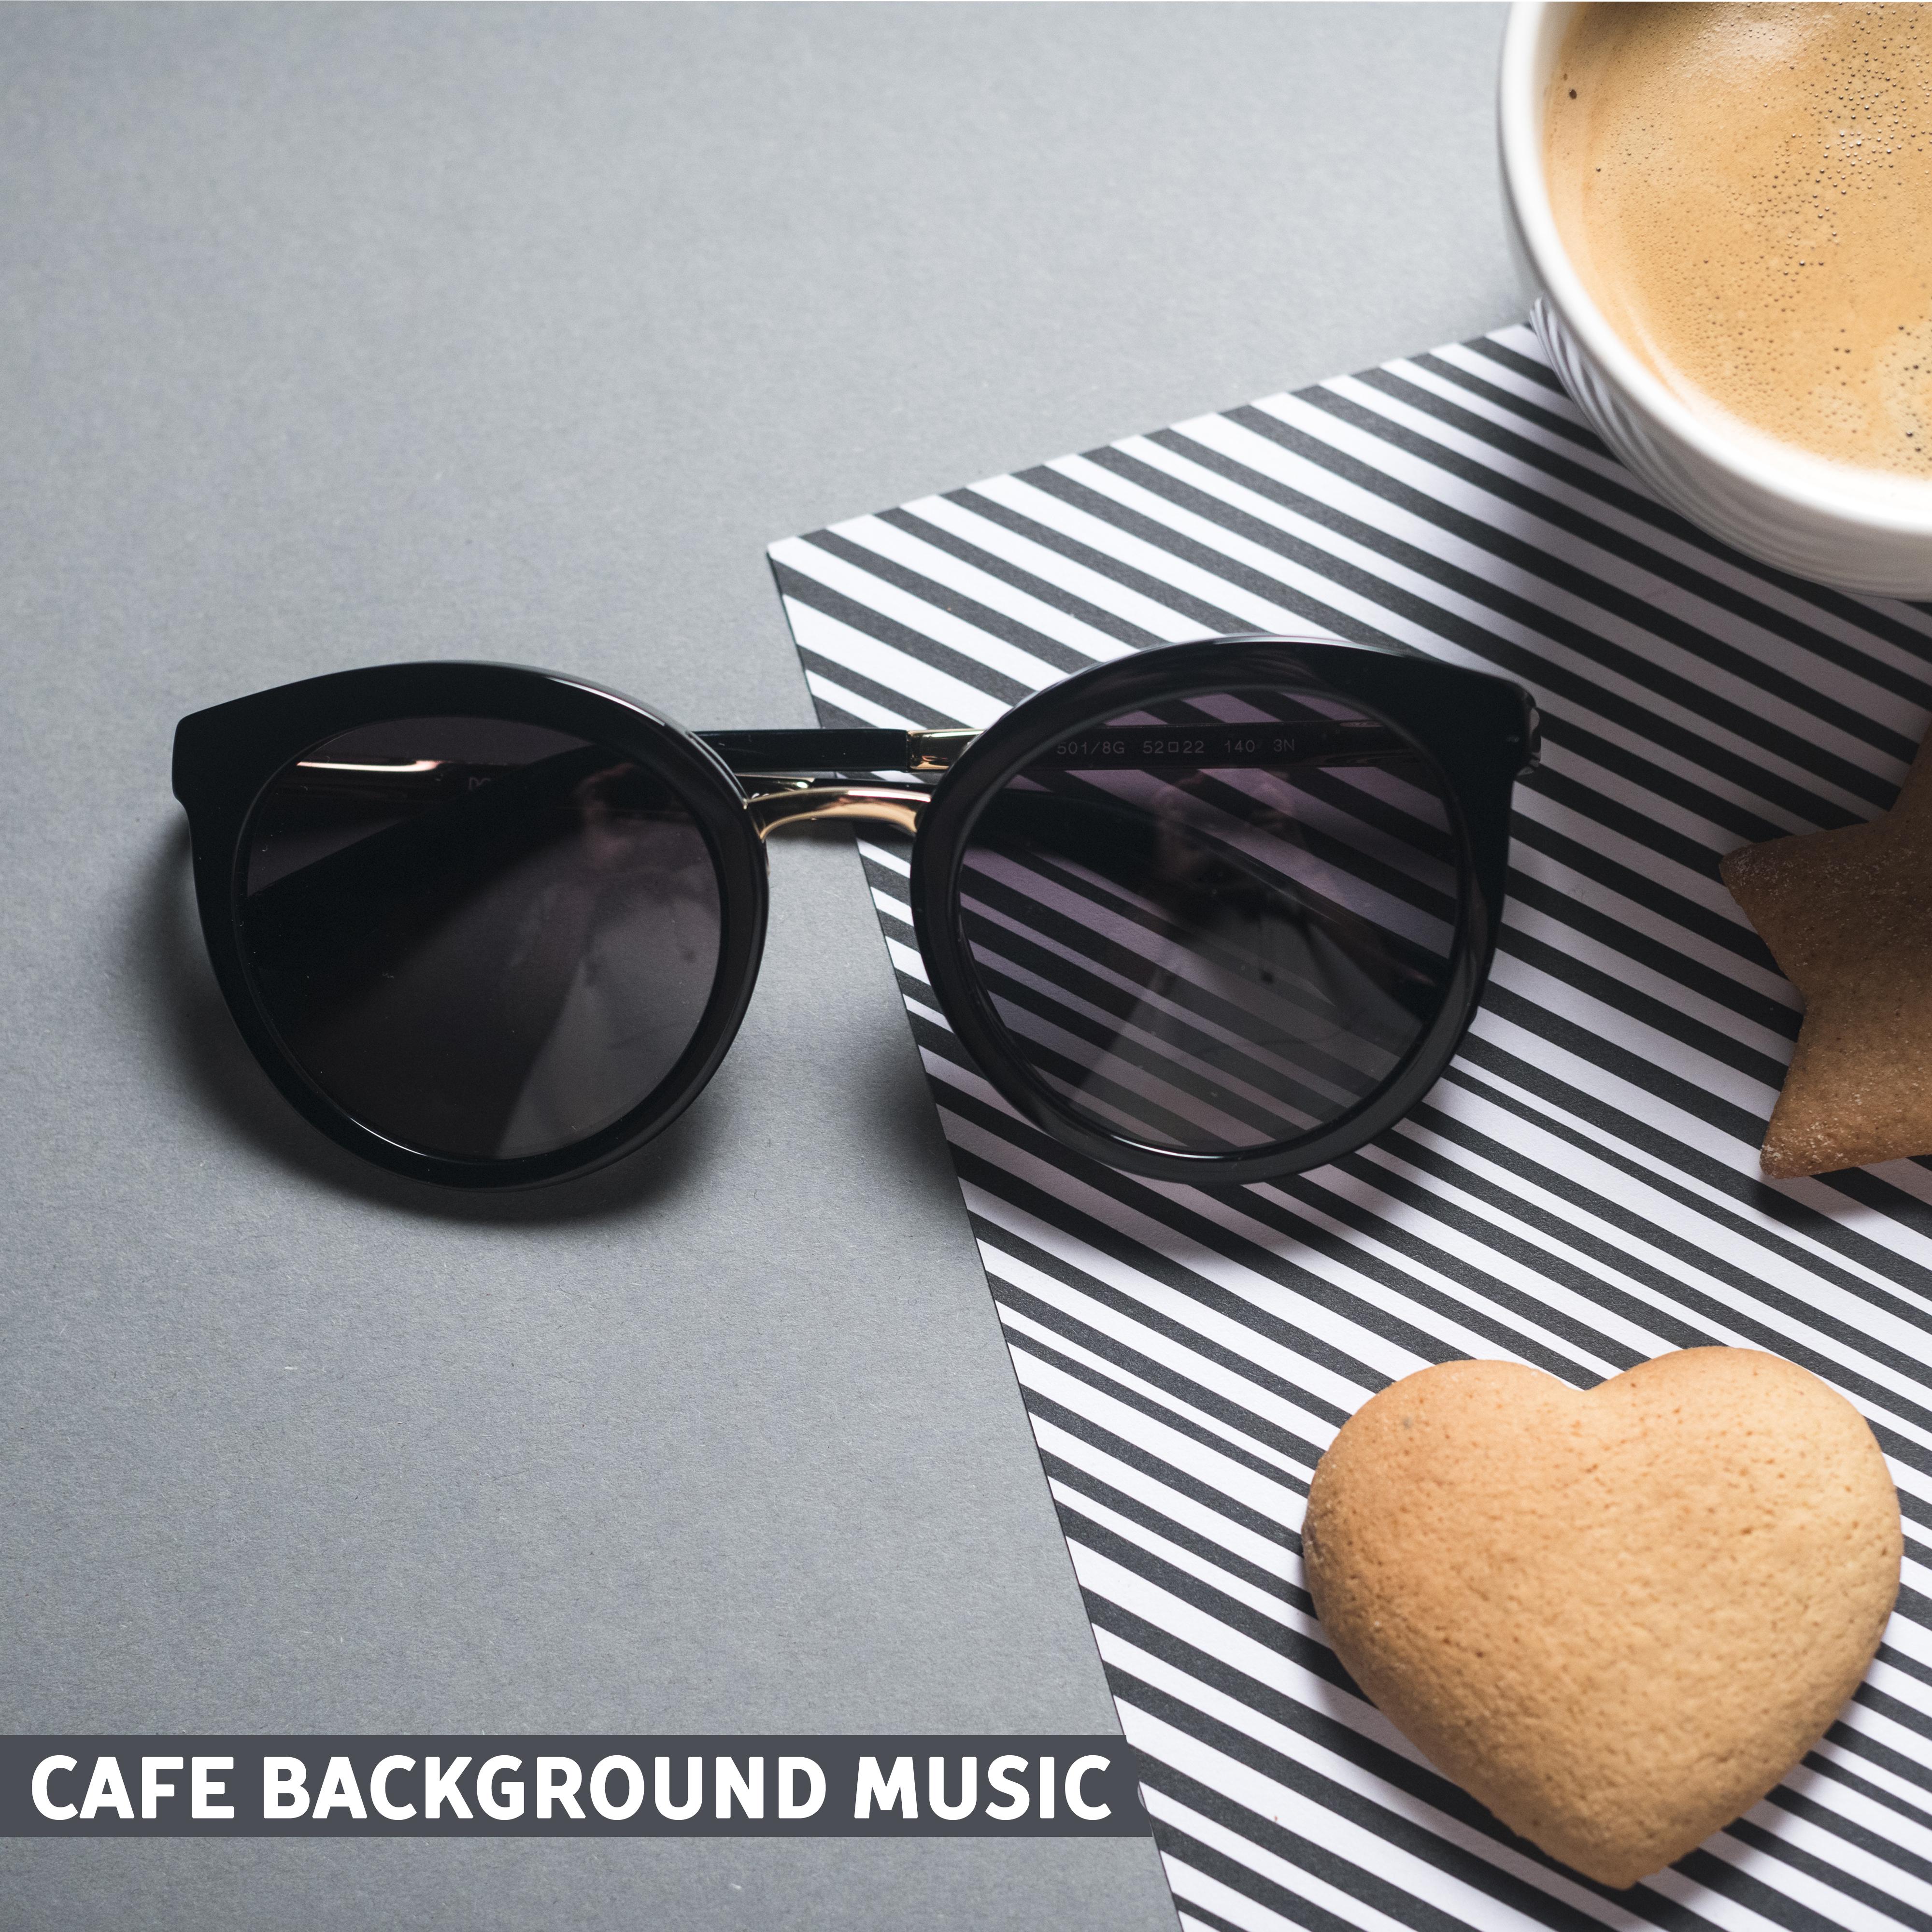 Cafe Background Music – Gentle Piano for Relaxation, Smooth Jazz for Restaurant, Dinner for Two, Coffee Talk, Pure Rest, Chilled Jazz, Ambient Music